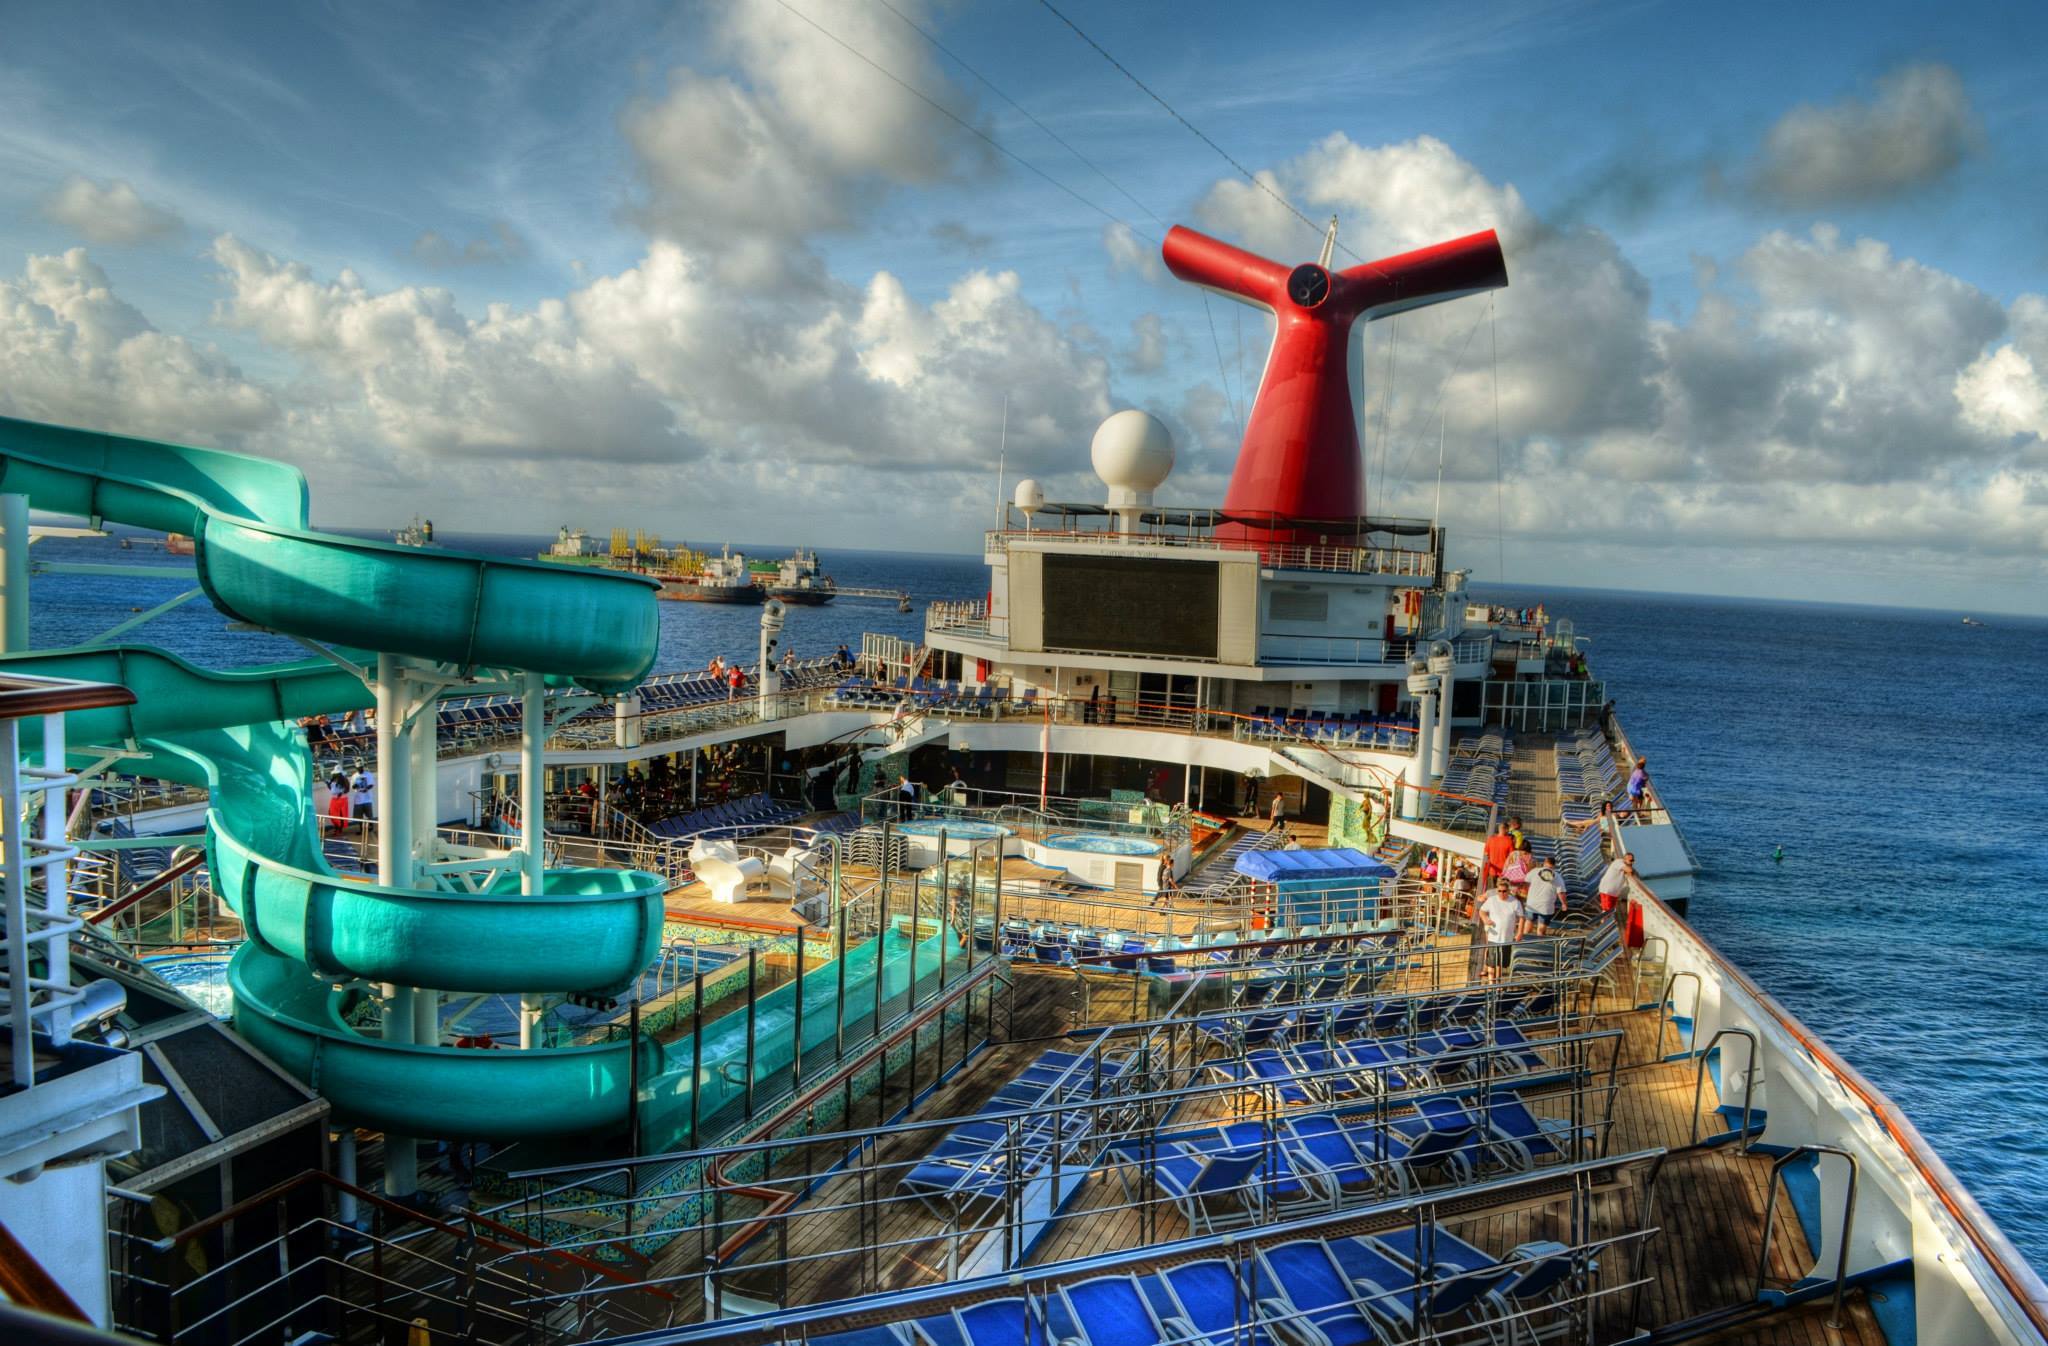 reviews on carnival cruise lines